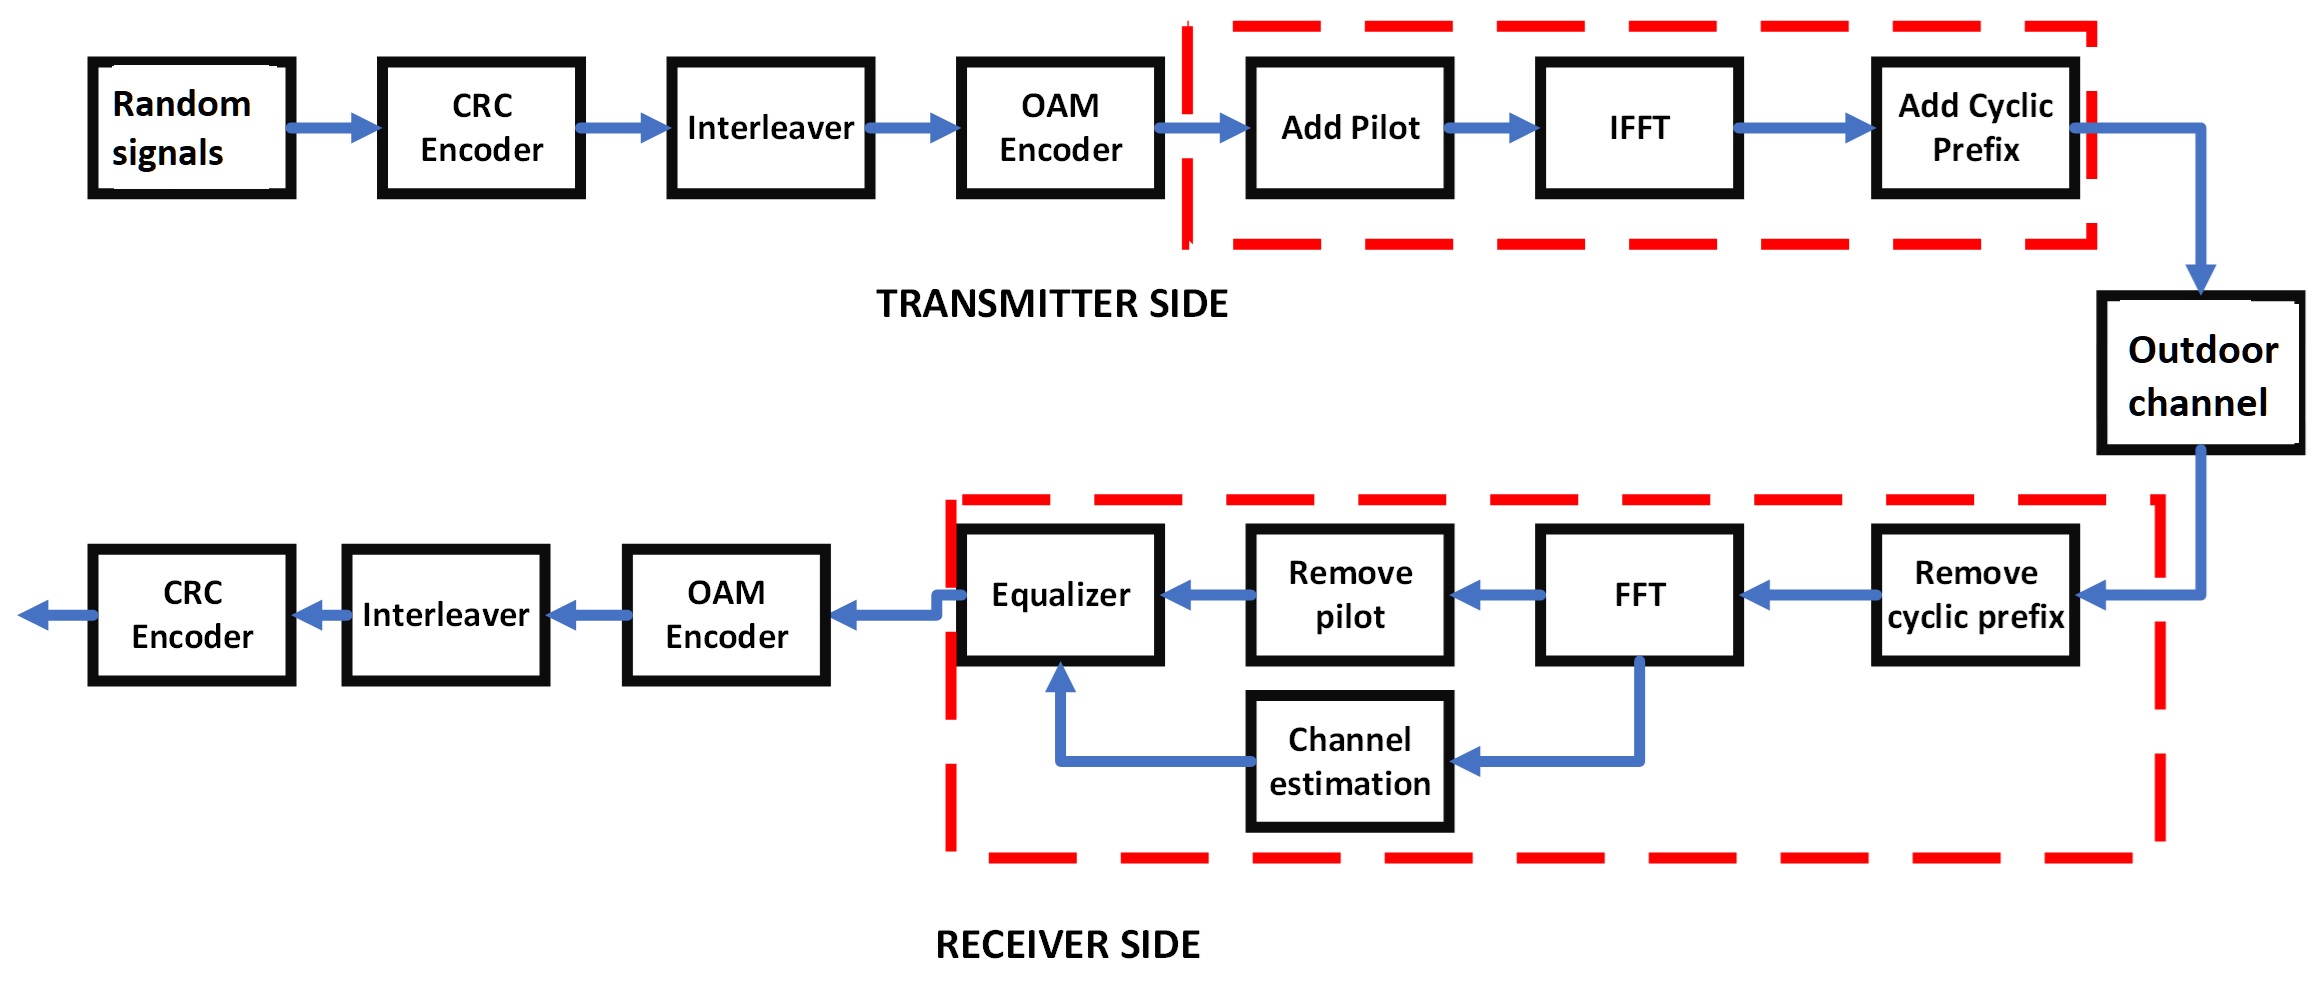 Analysis of OAM Modes and OFDM Modulation for Outdoor Conditions